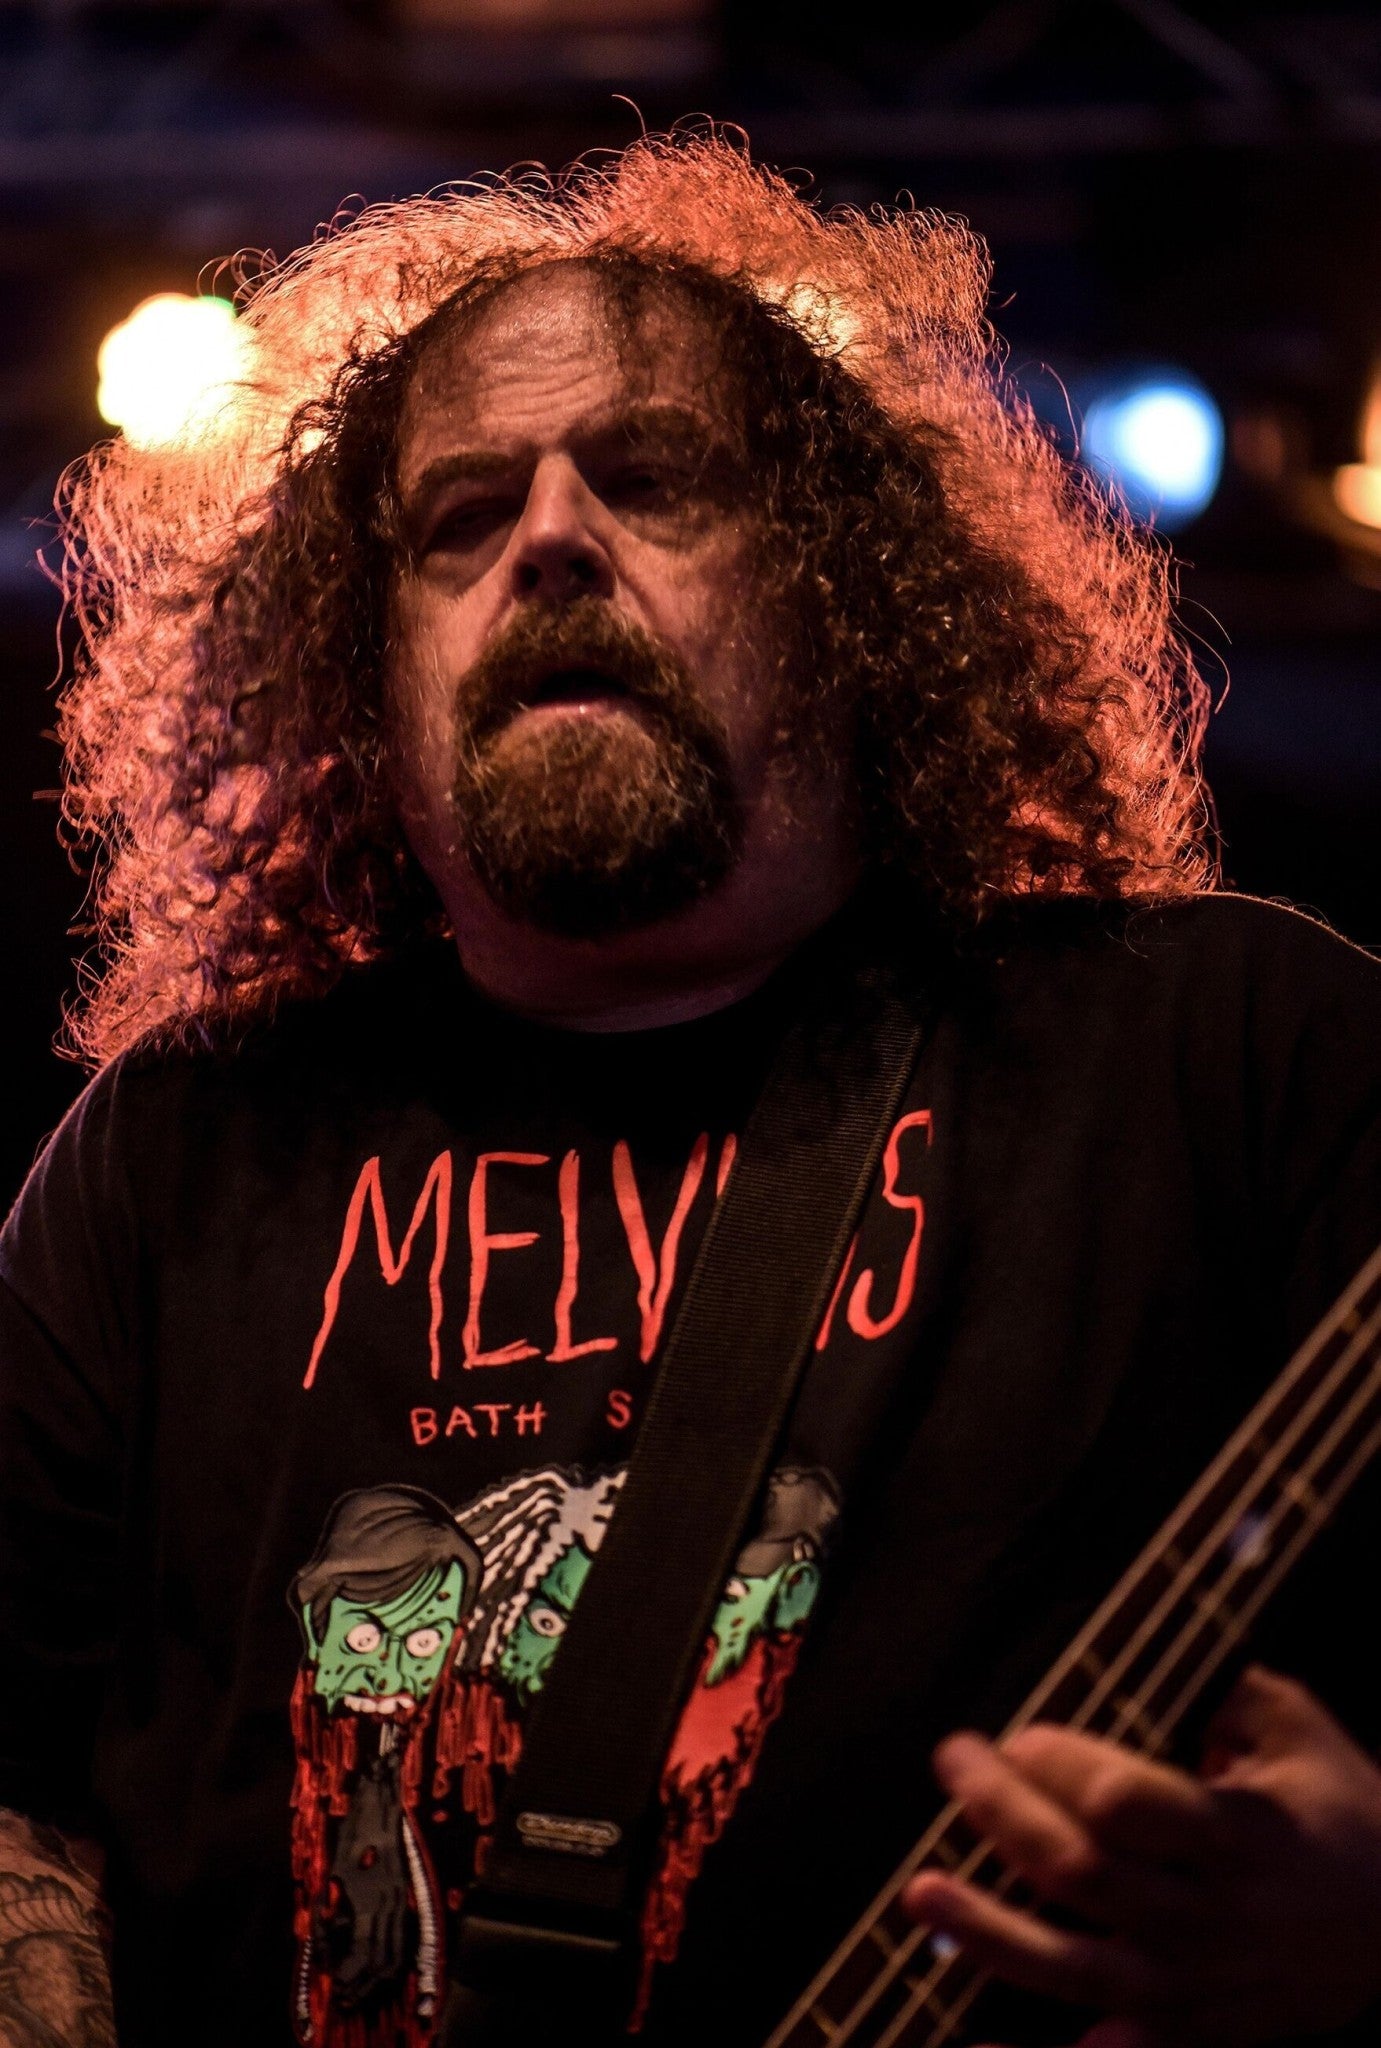 Napalm Death - Shane Embury's Stage Portrait with a Melvins T-Shirt, England, 2019 Poster (2/3)